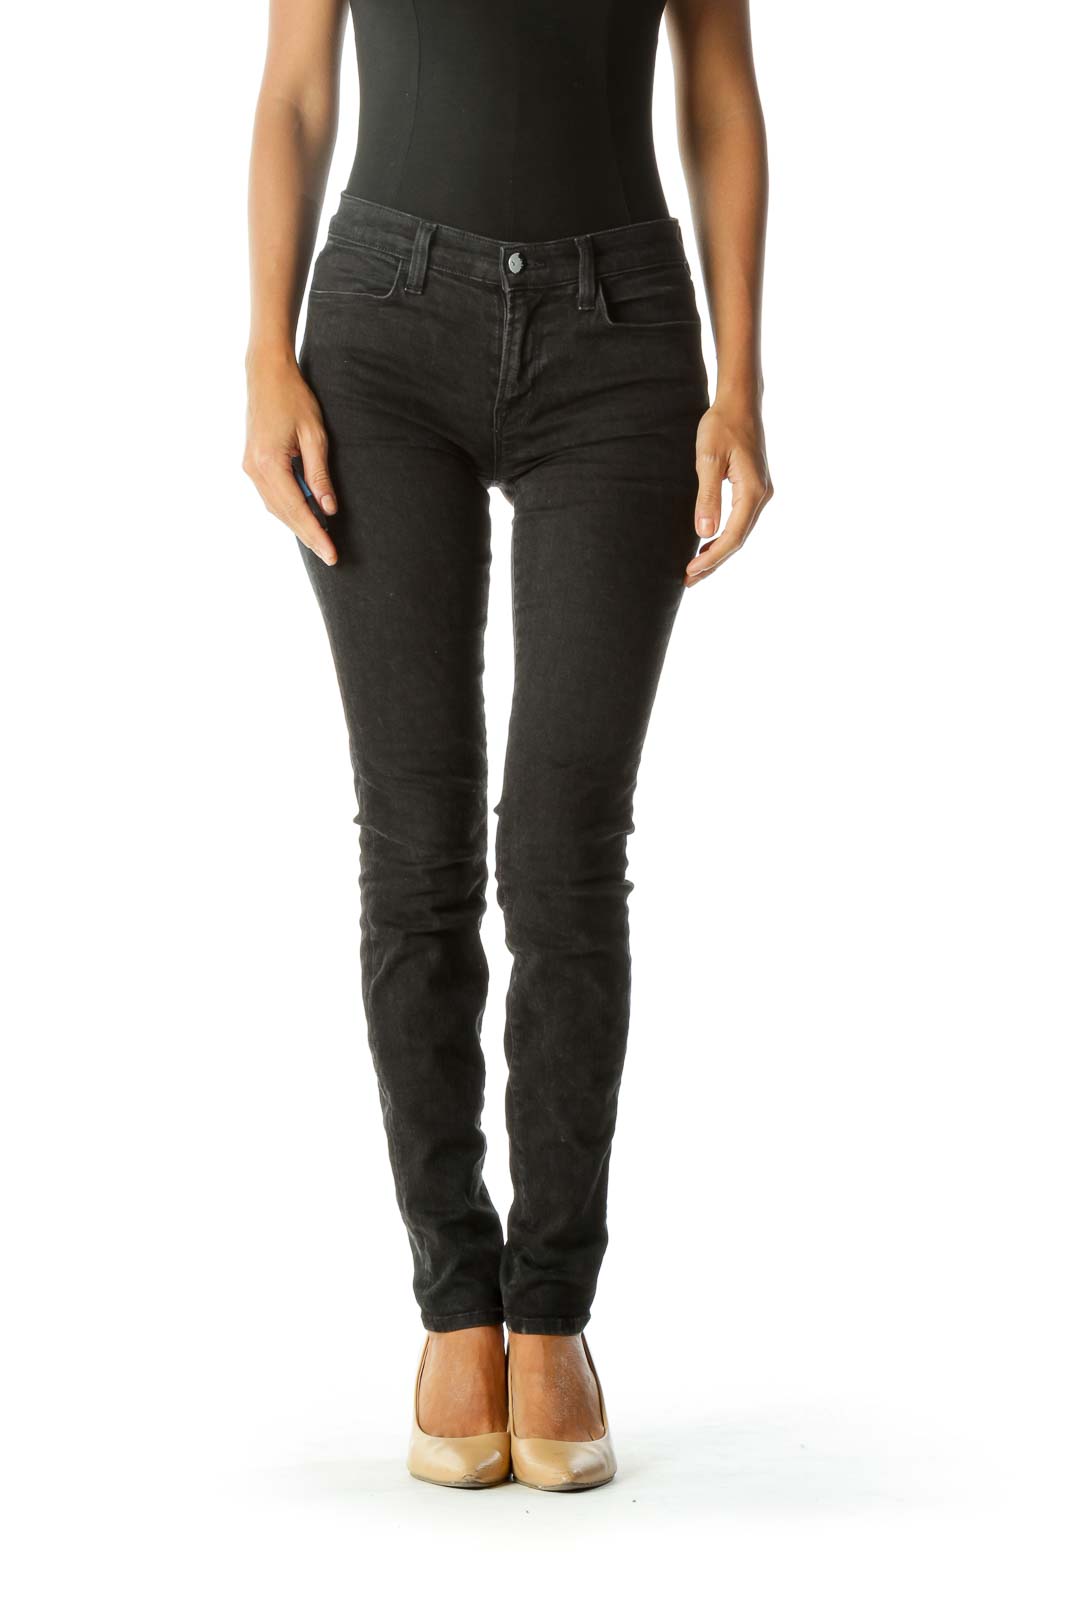 Black Leopard-Print Super Skinny Jeans with Silver Engraved Button Front